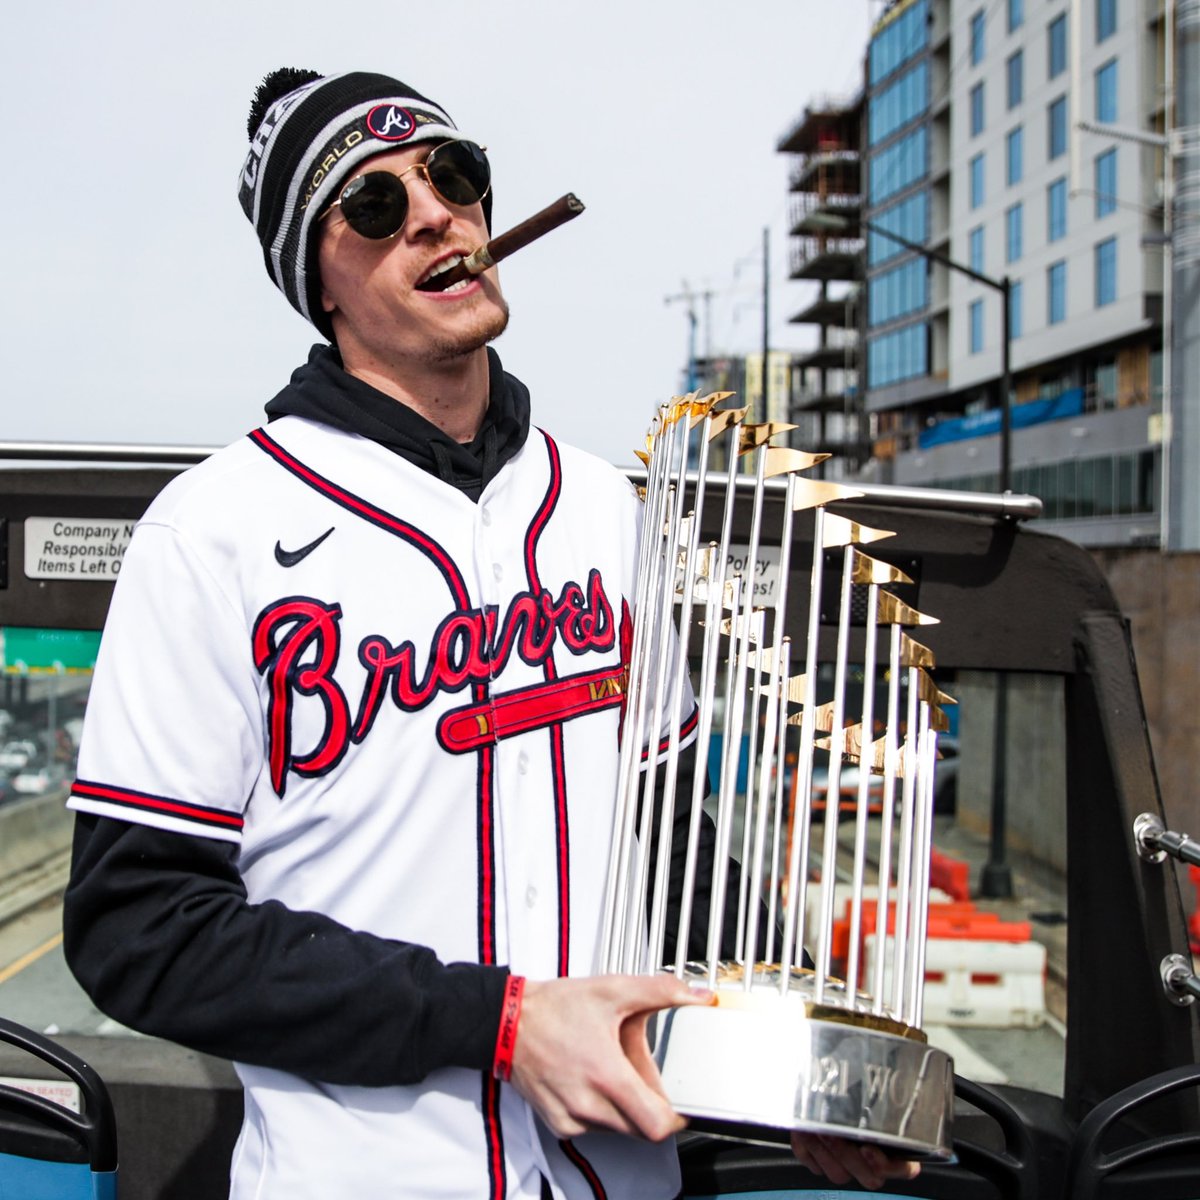 Max Fried has more wins than anyone not named Gerrit Cole since the start of the 2019 season. Put that in your Cohiba and smoke it.

Merry Christmas https://t.co/zCyg2UsnK6